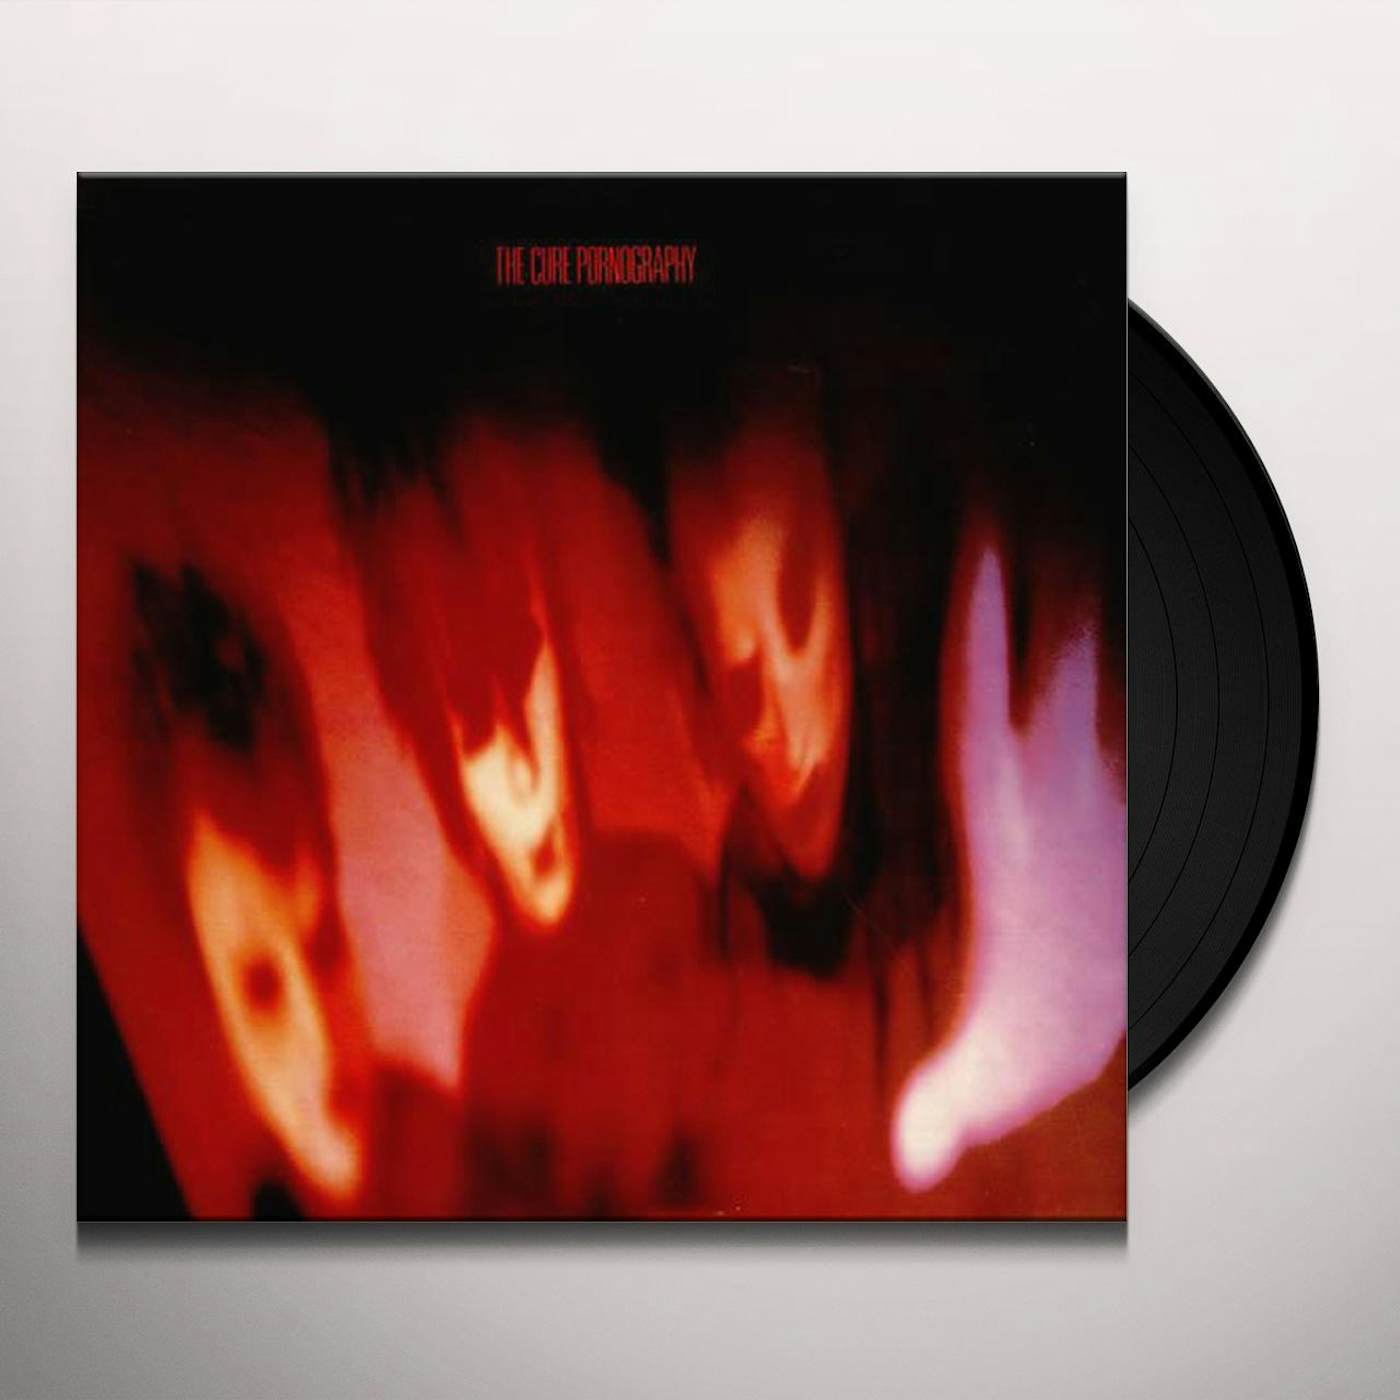 The Cure Pornography (180g) Vinyl Record